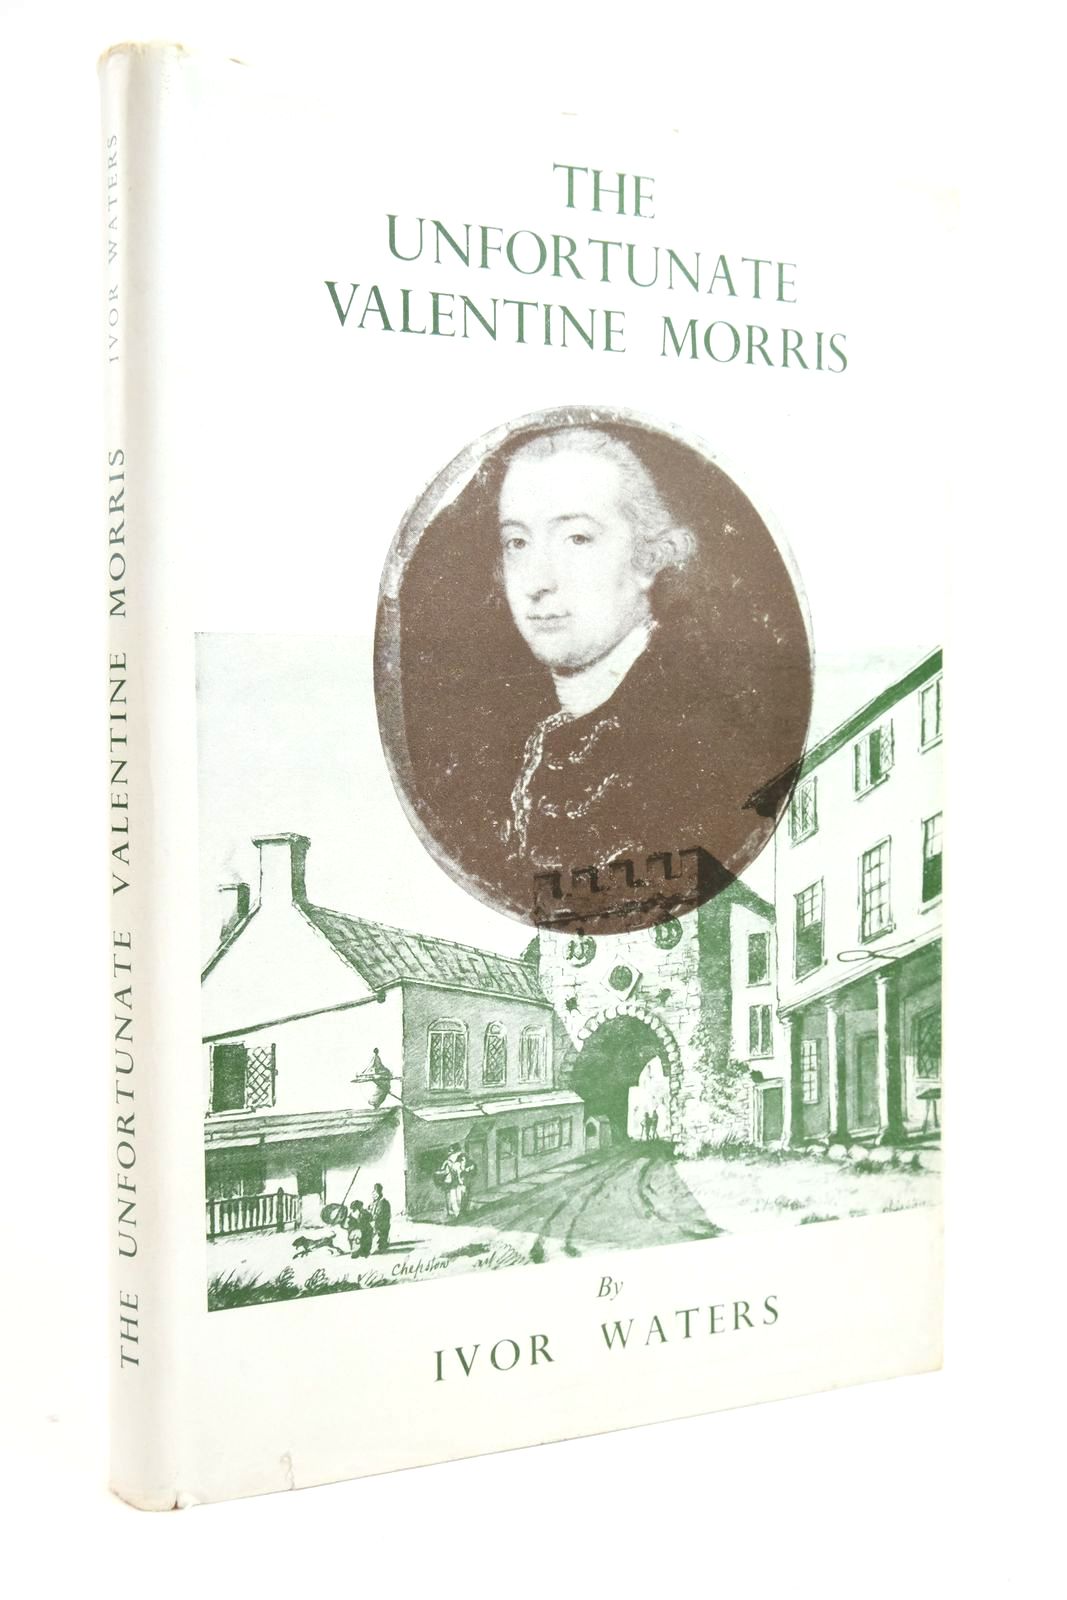 Photo of THE UNFORTUNATE VALENTINE MORRIS written by Waters, Ivor published by The Chepstow Society (STOCK CODE: 2136209)  for sale by Stella & Rose's Books